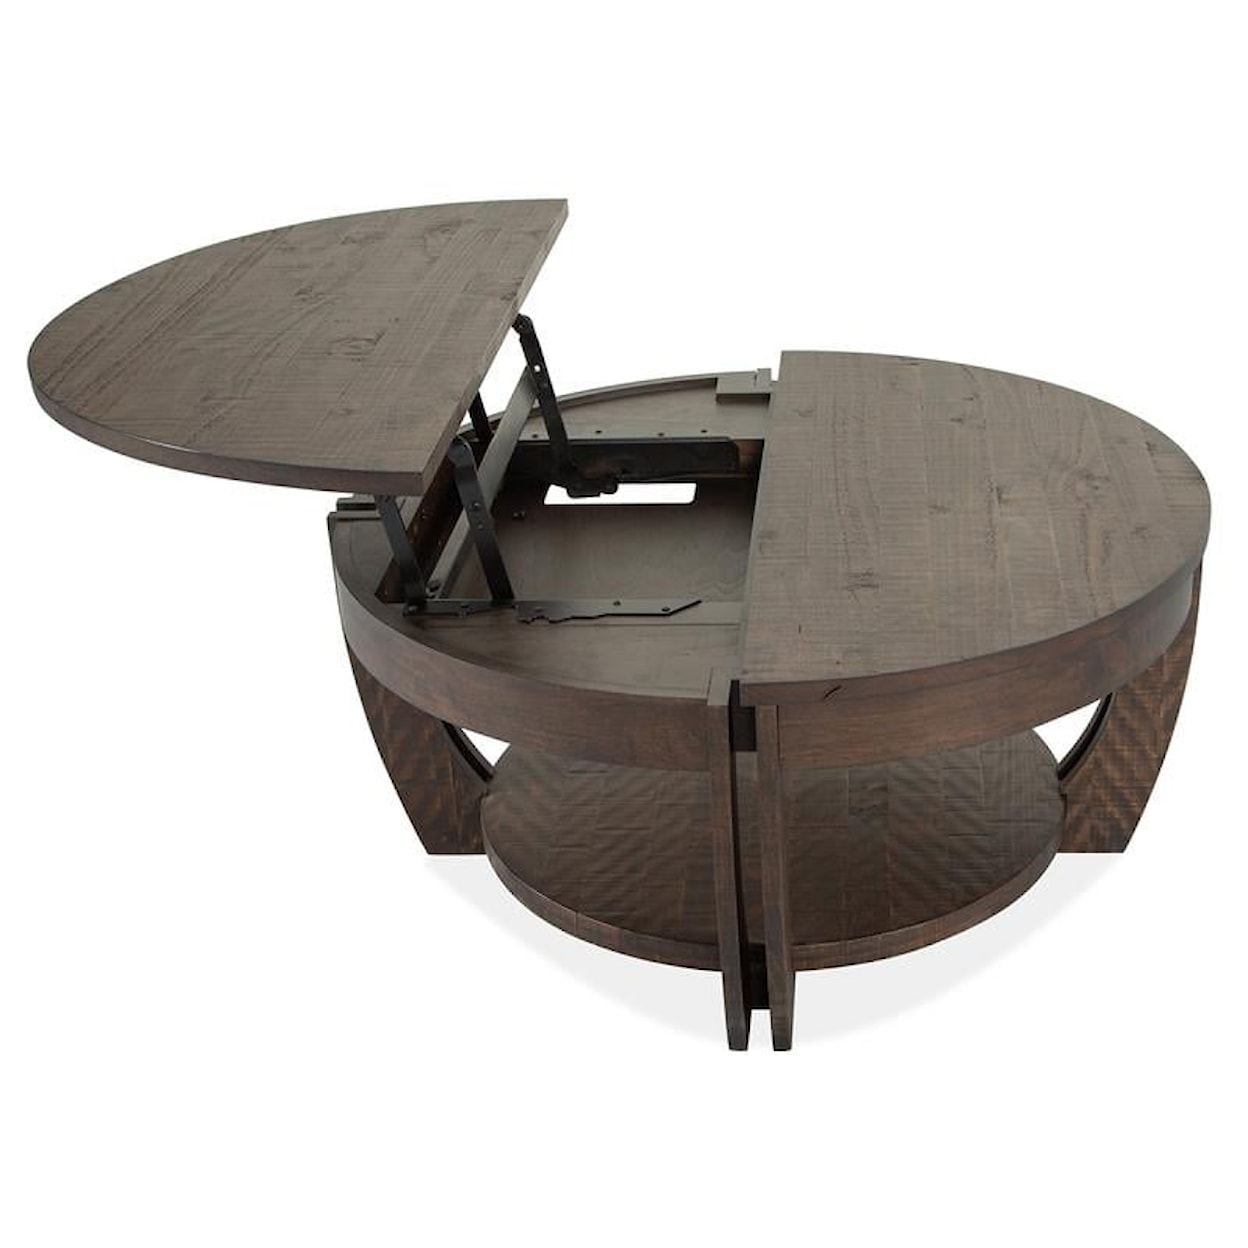 Magnussen Home Lyndale Occasional Tables Lift Top Storage Cocktail Table